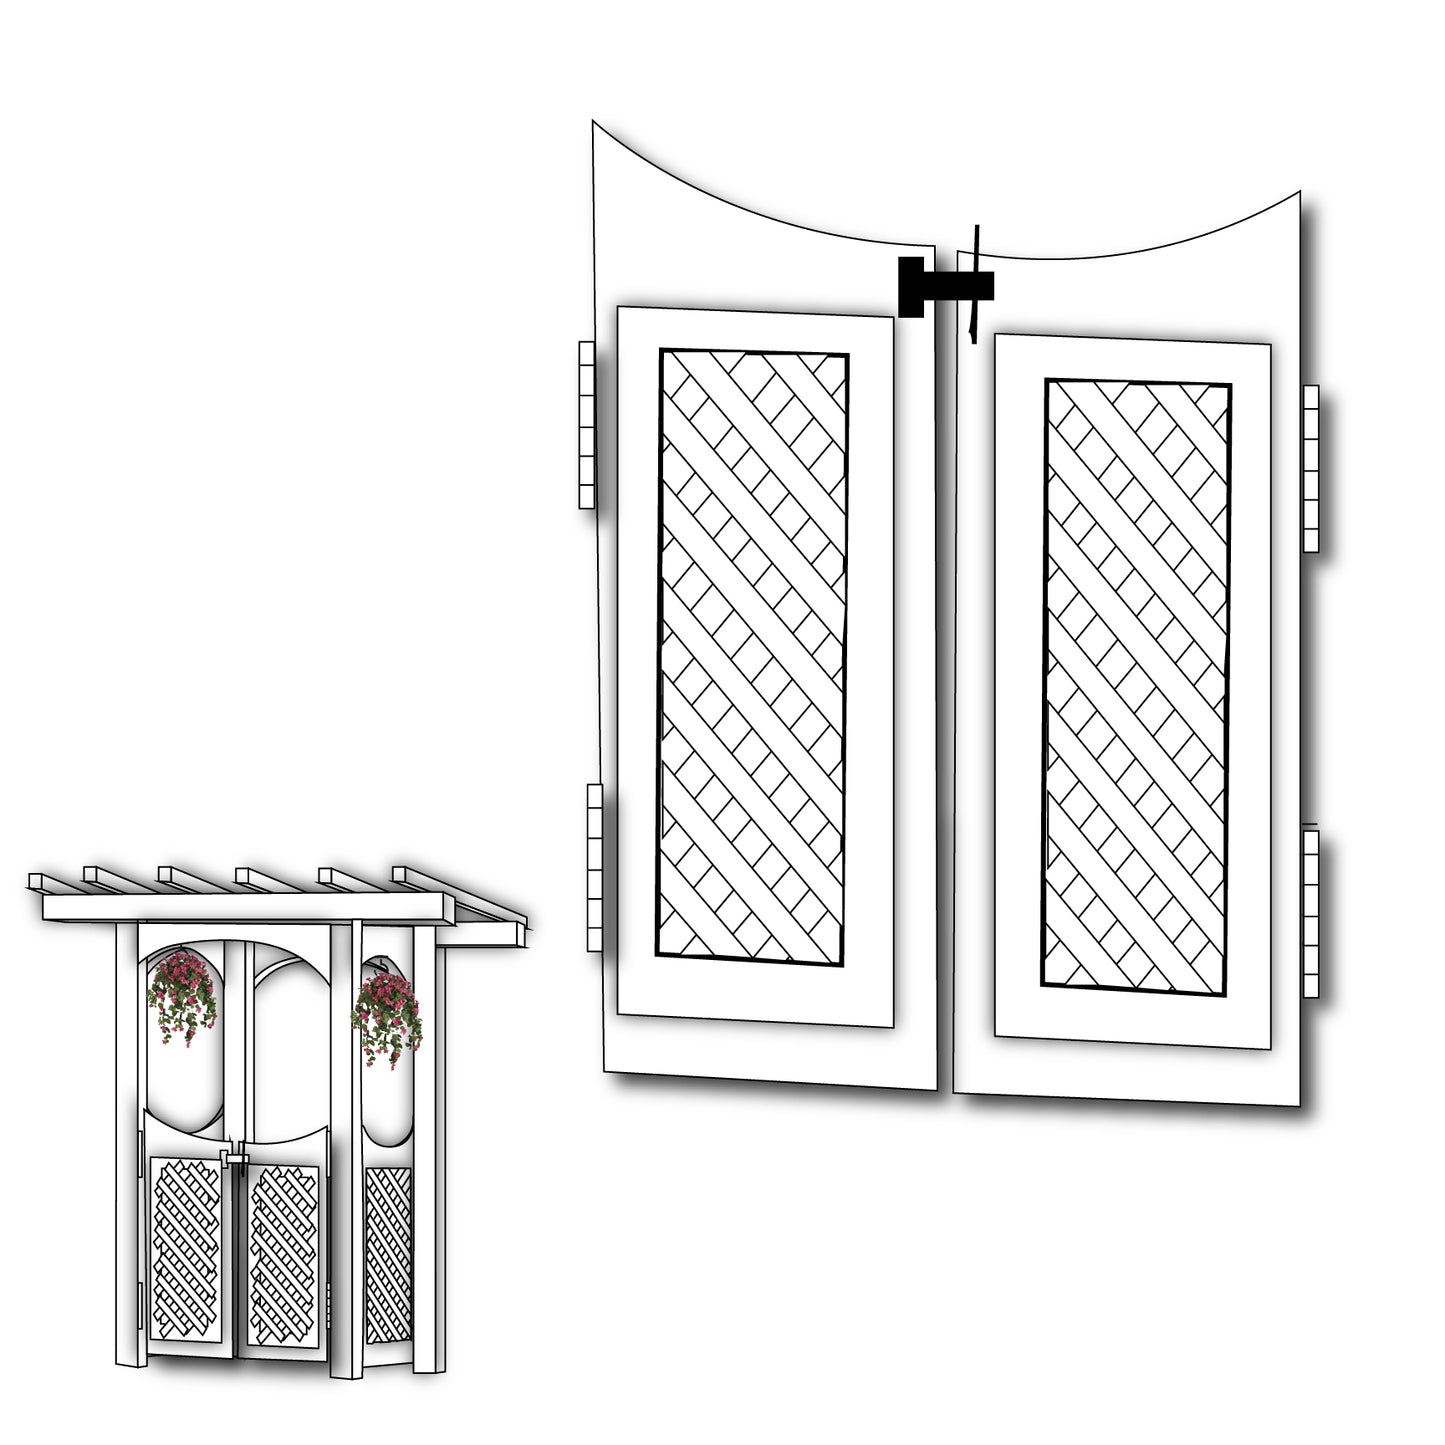 45" Height x 37".5 Width- Ornamental Arbor Gate, With Cutout Laser Picture Panel (Lattice Pattern)